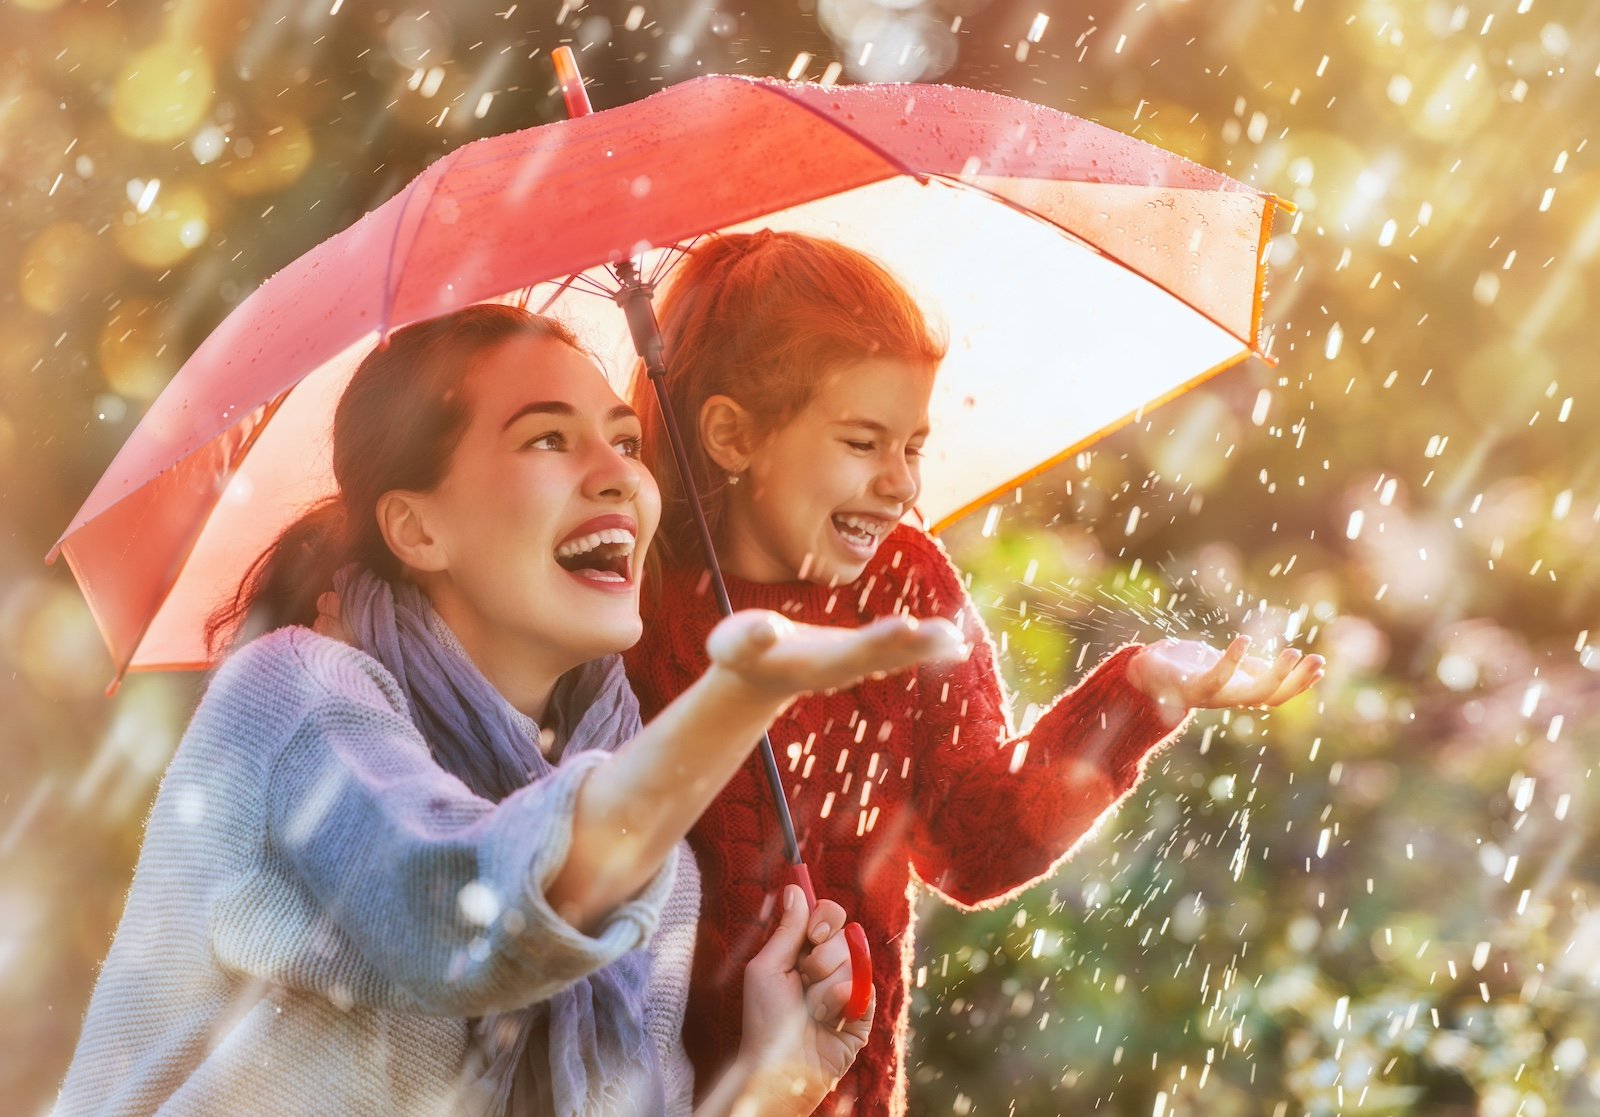 Happy funny family with red umbrella under the autumn shower. Girl and her mother are enjoying rainfall. Kid and mom are playing on the nature outdoors. Walk in the park.